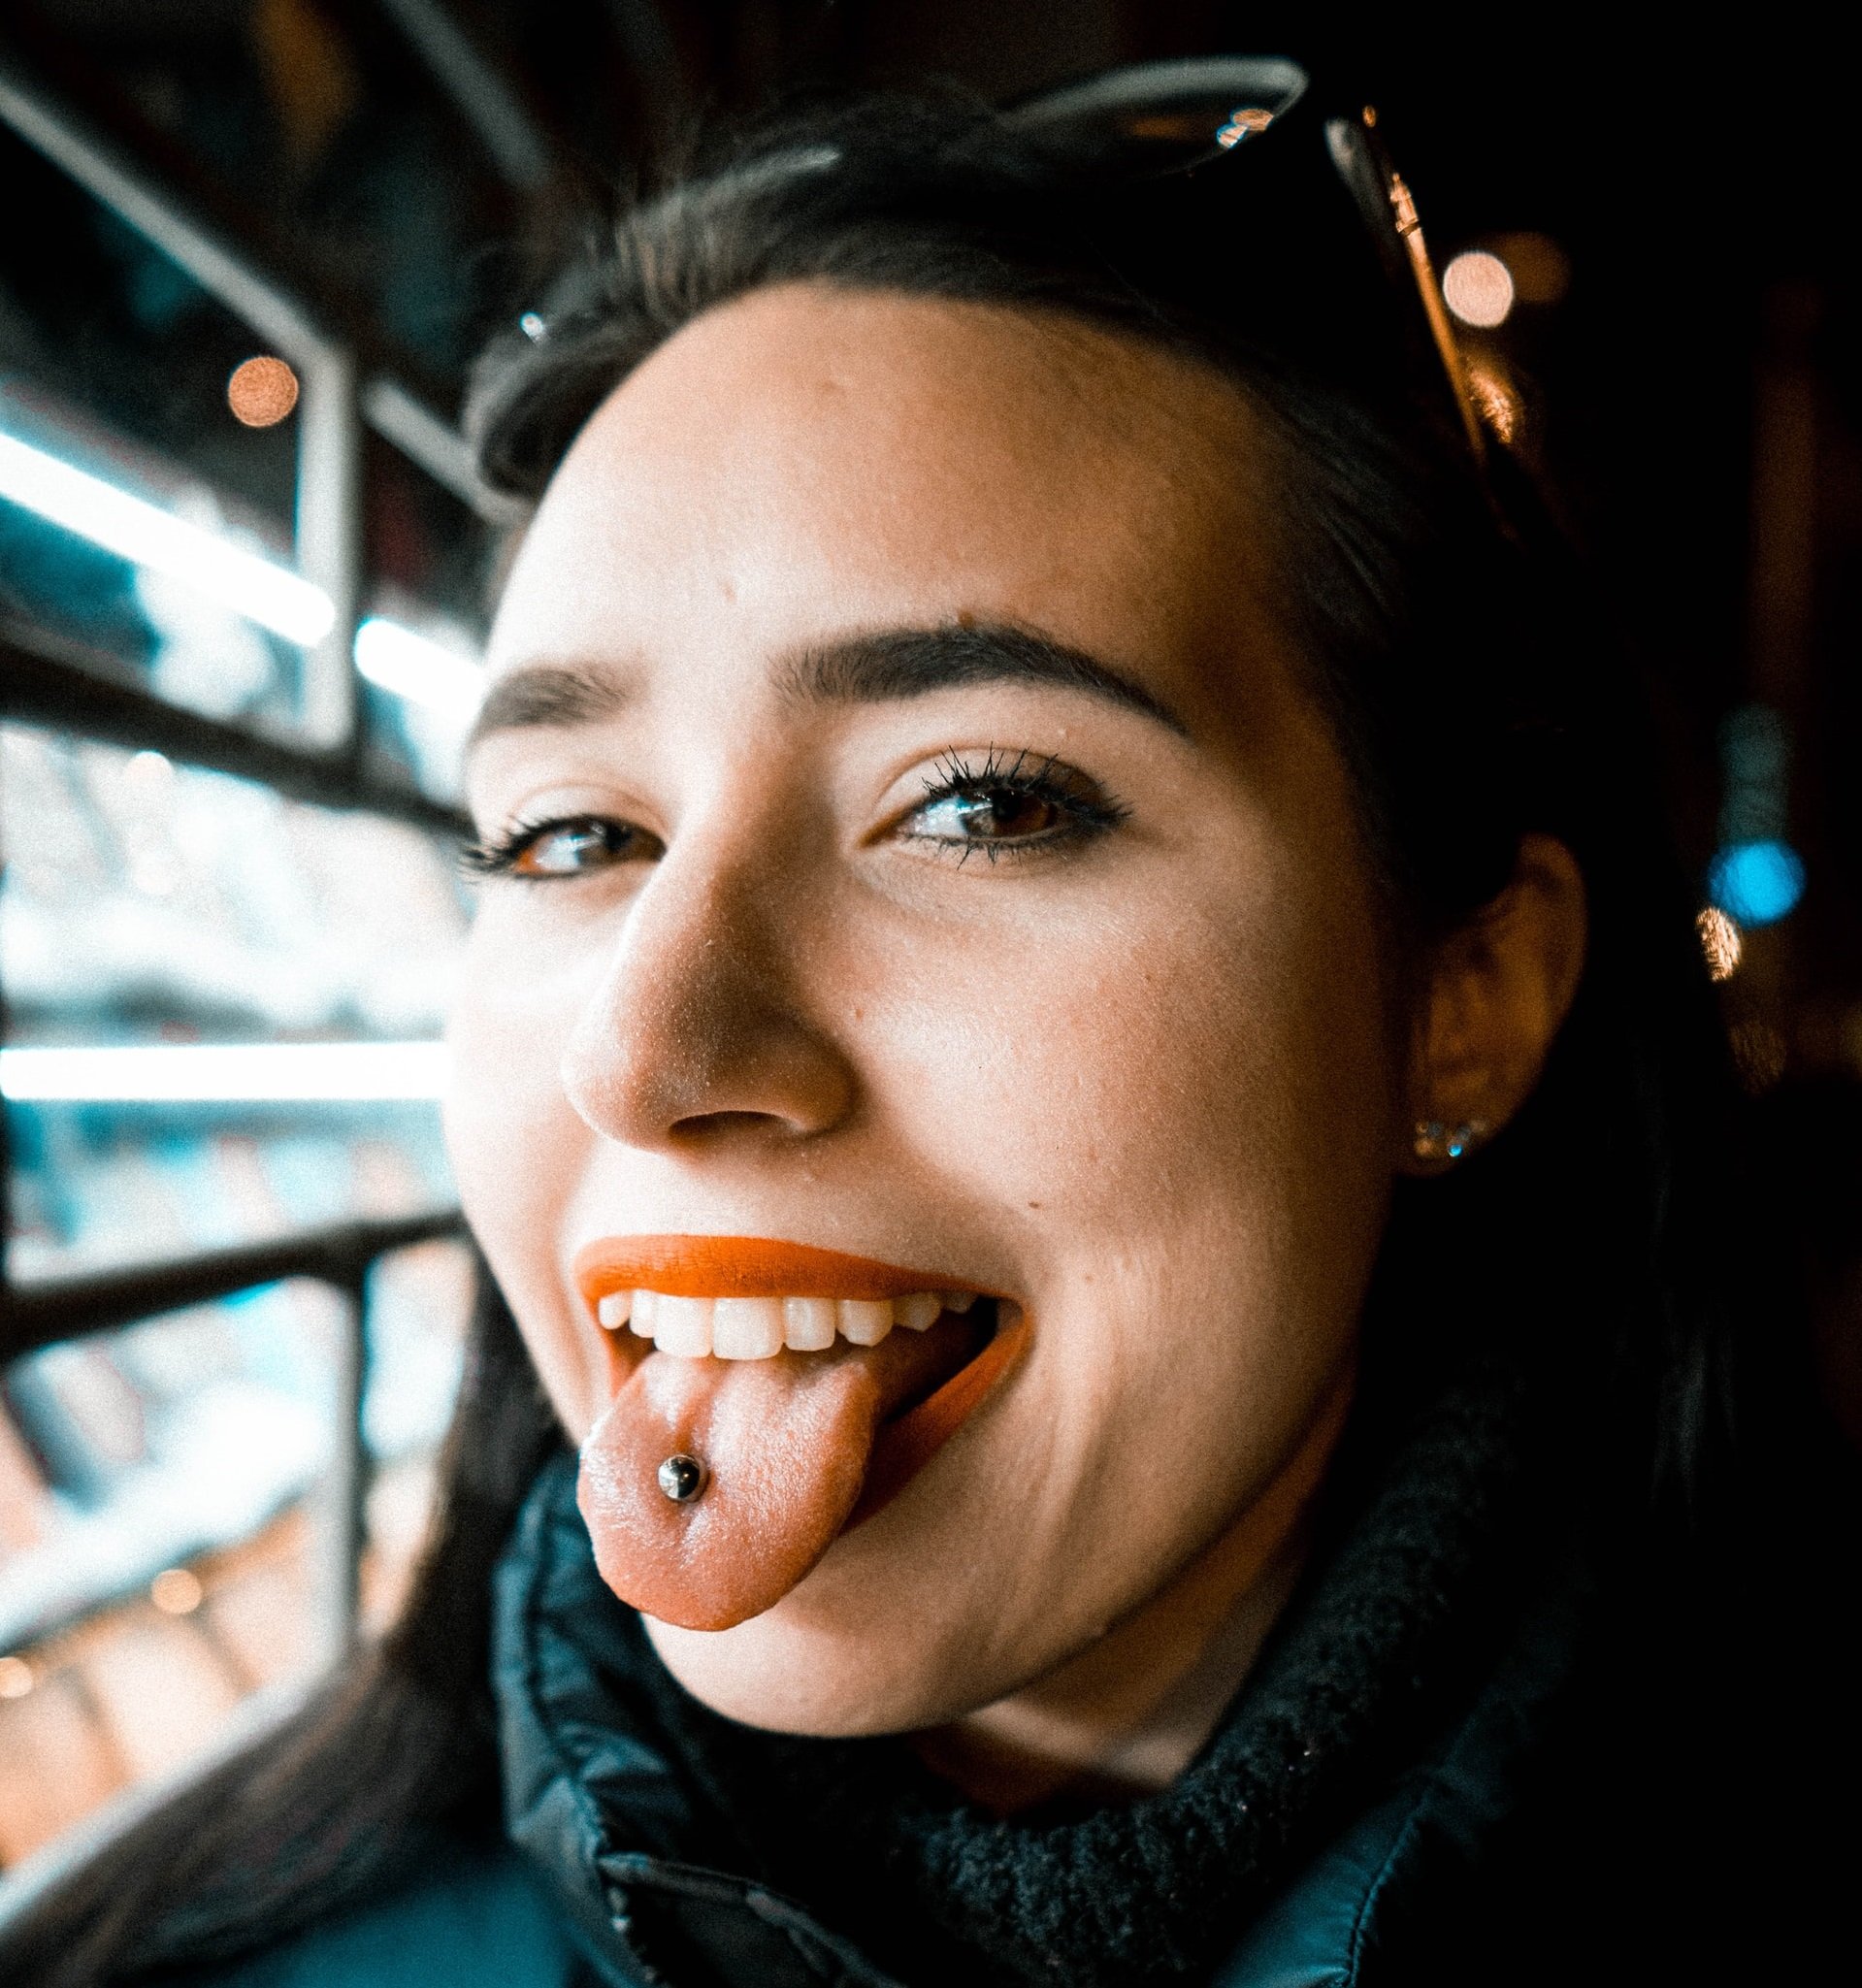 Another Redditor shared when she got her piercings | Source: Unsplash